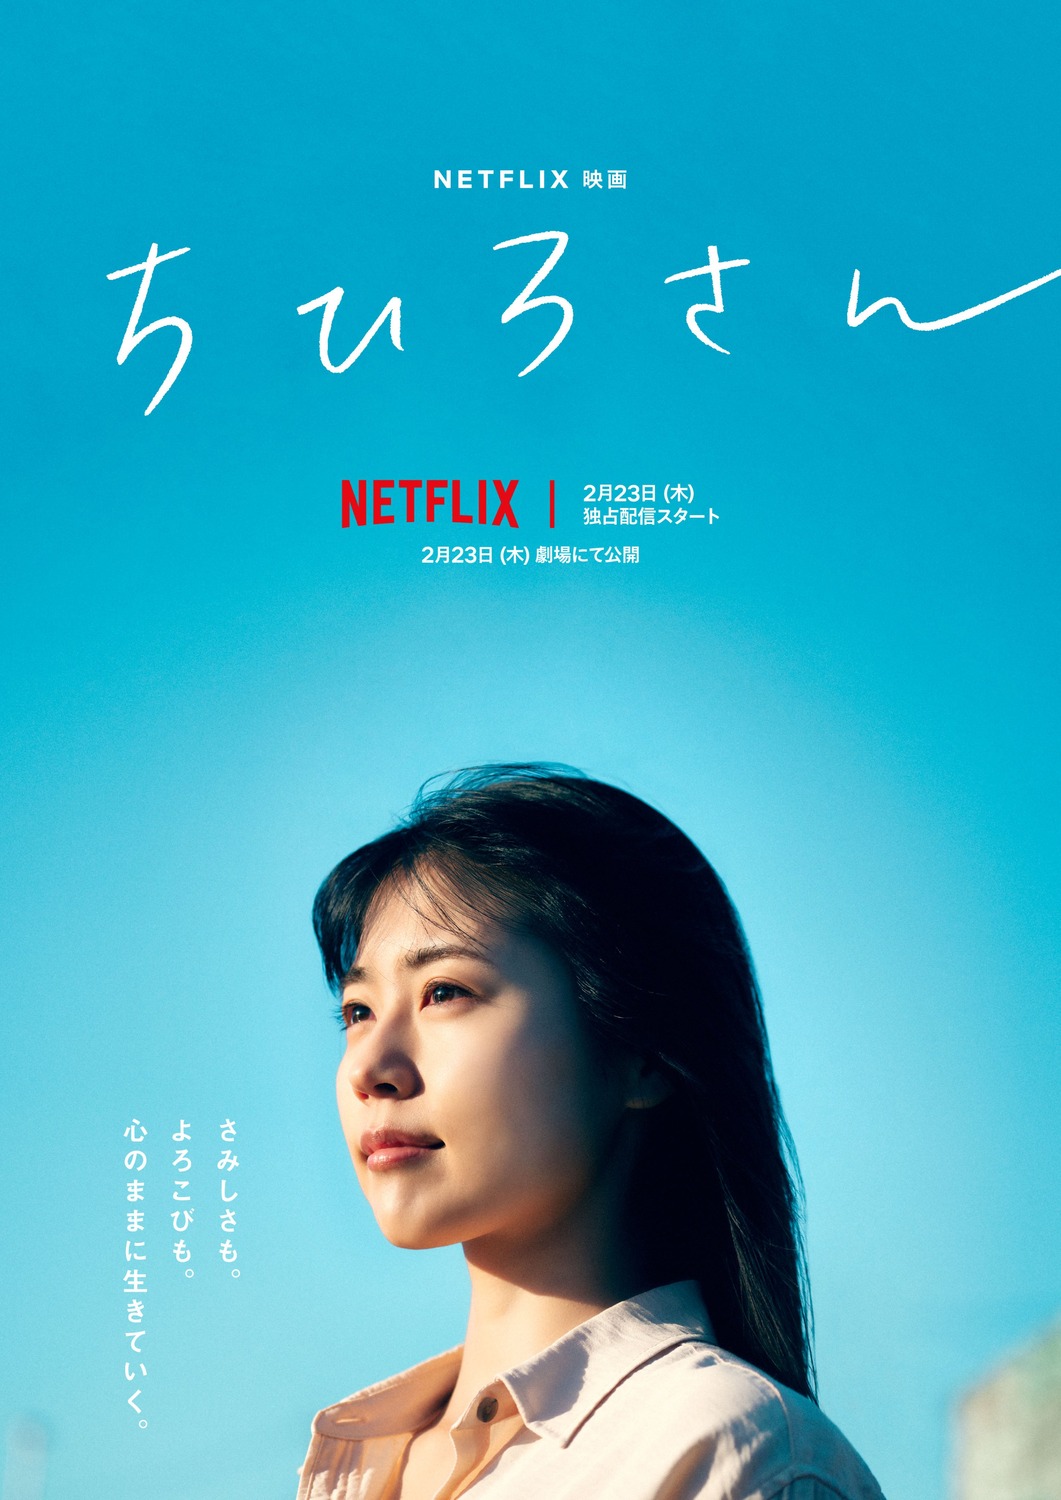 Extra Large Movie Poster Image for Call Me Chihiro 